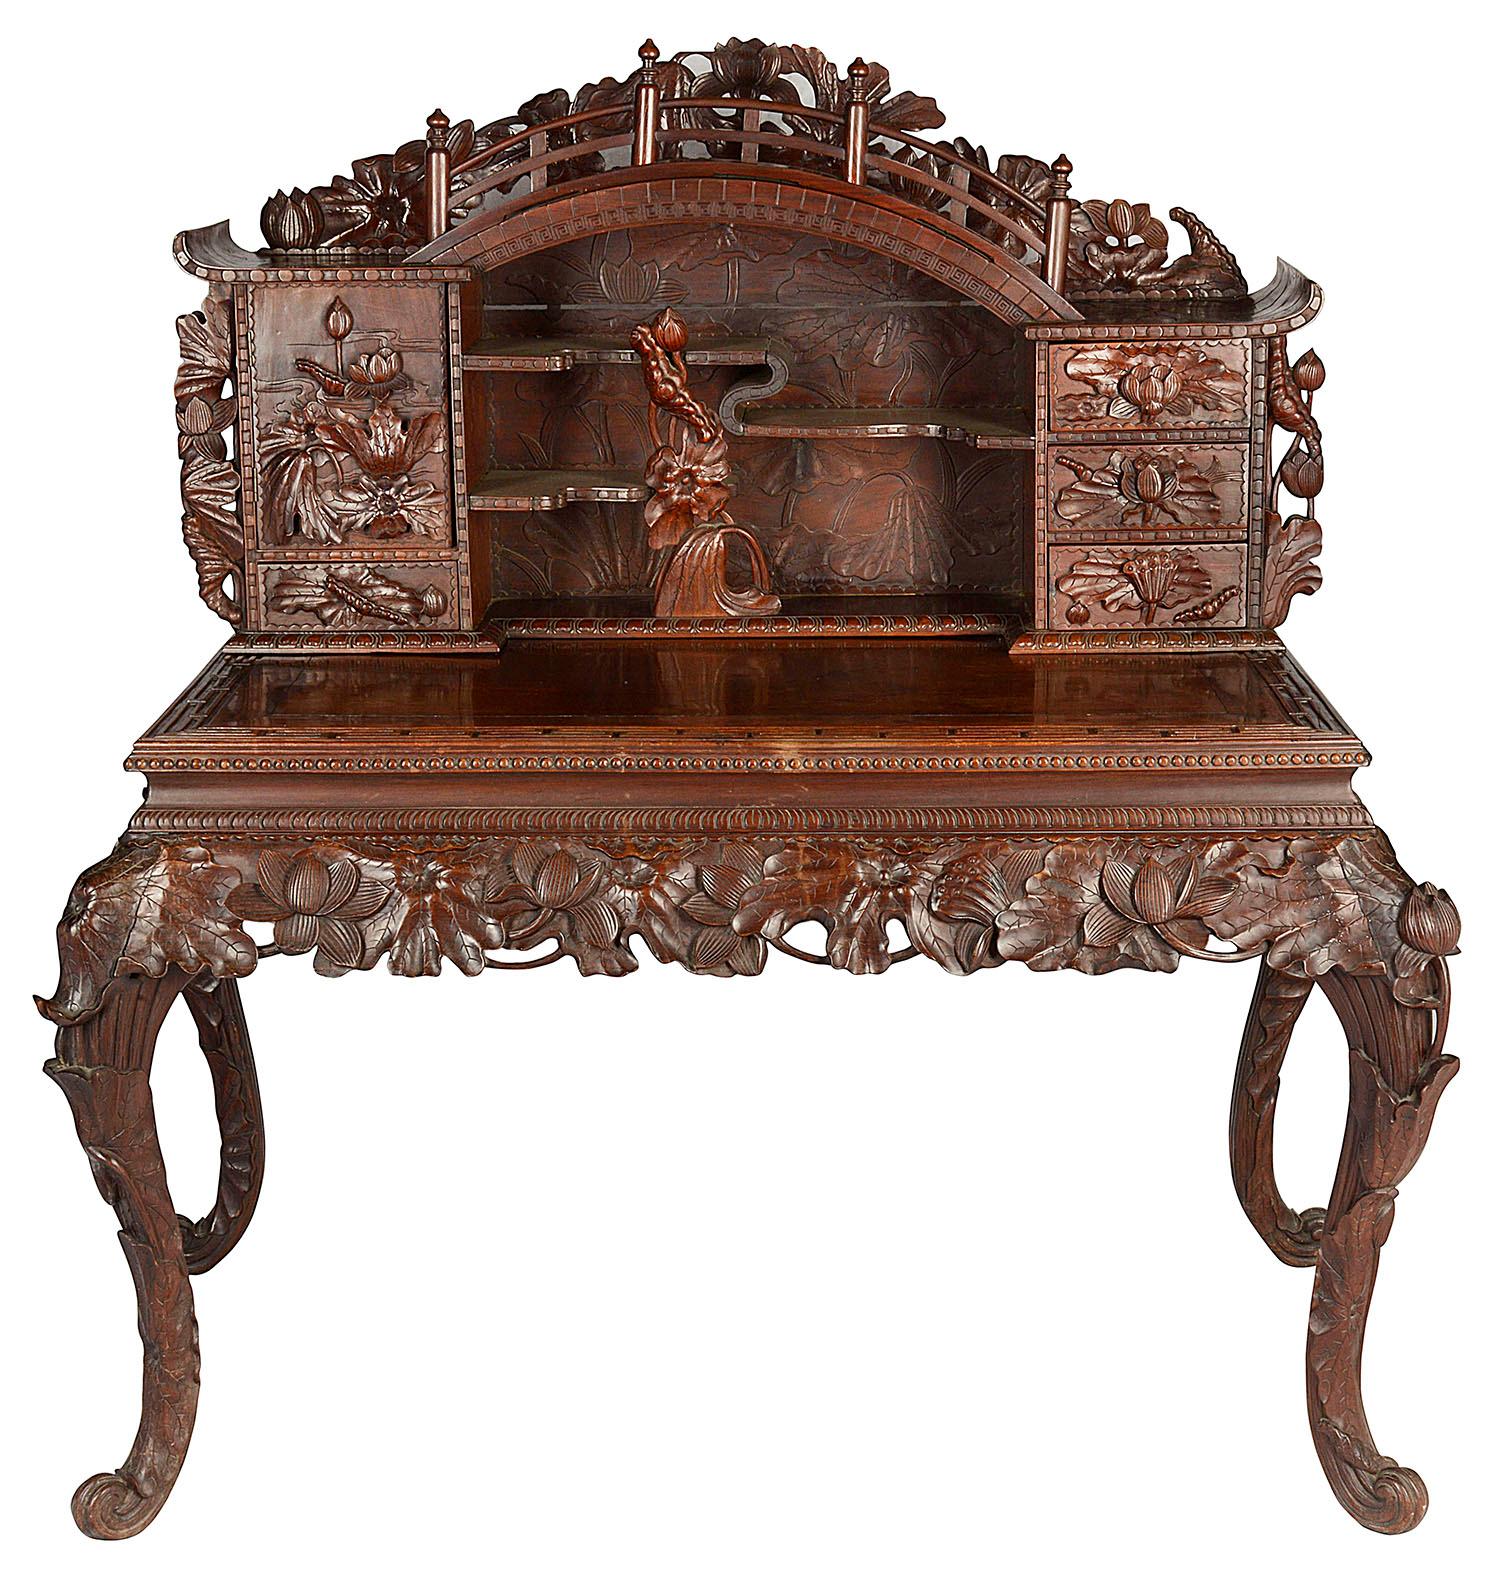 A very impressive fine quality Japanese hardwood desk from the Meiji era, having a bridge like structure to the top, shelves, cupboards and drawers all with wonderful carved floral and leaf decoration, as is the frieze and raised on elegant cabriole